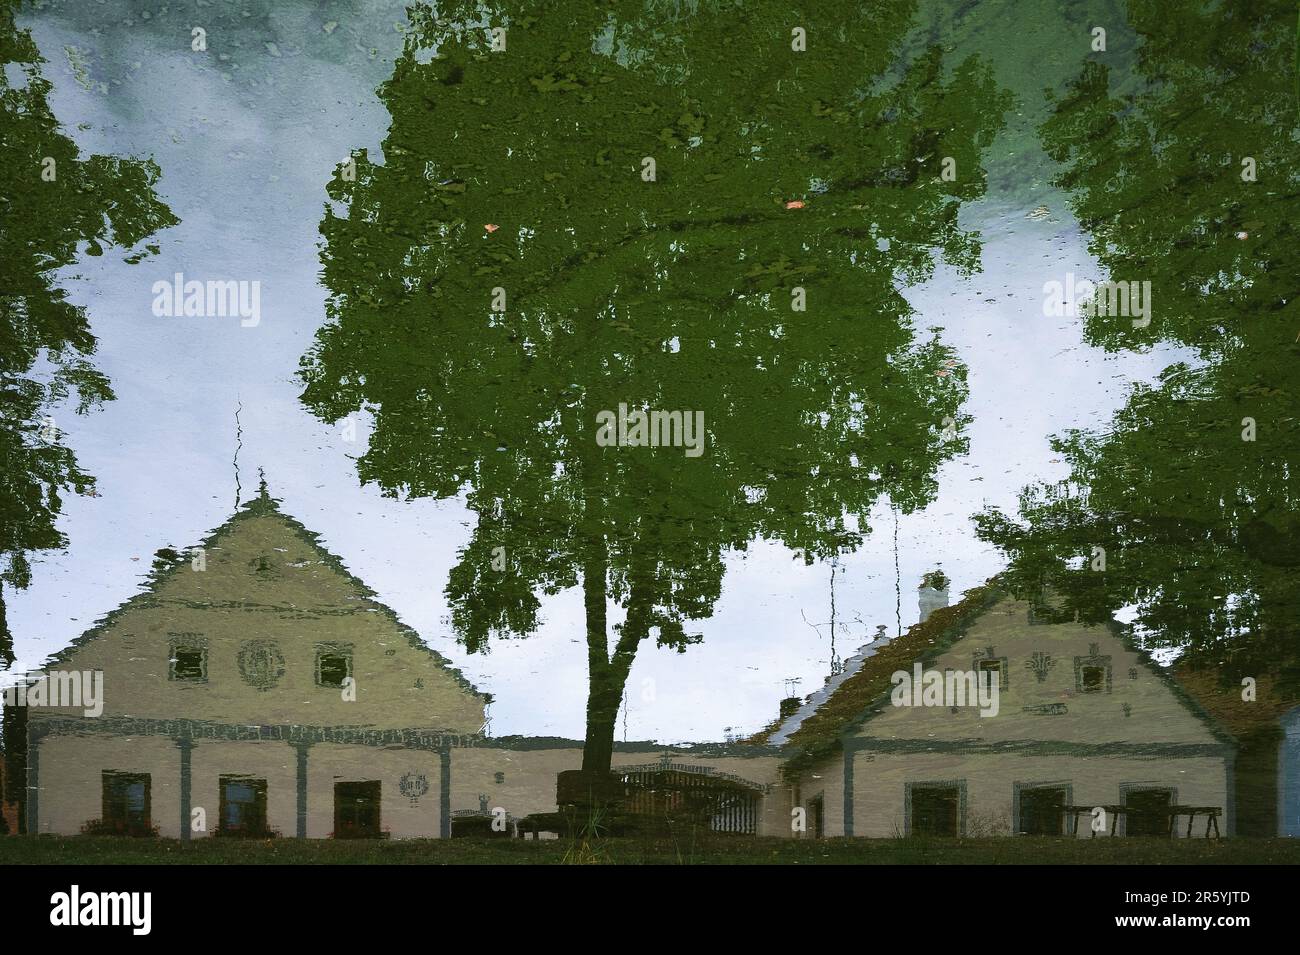 This image has been rotated by 180 degrees.  Pointed gables of properties in Holašovice, South Bohemia, Czech Republic or Czechia, reflected in the still water of a pond on the village green.  Holašovice is a well-preserved example of a traditional Central European village with a ground plan dating from the Middle Ages and a number of 1700s AD and 1800s AD vernacular buildings in a style known as South Bohemian Folk Baroque, Rural Baroque or Rustic Baroque.  In 1997 the village was included in the UNESCO World Cultural Heritage List. Stock Photo